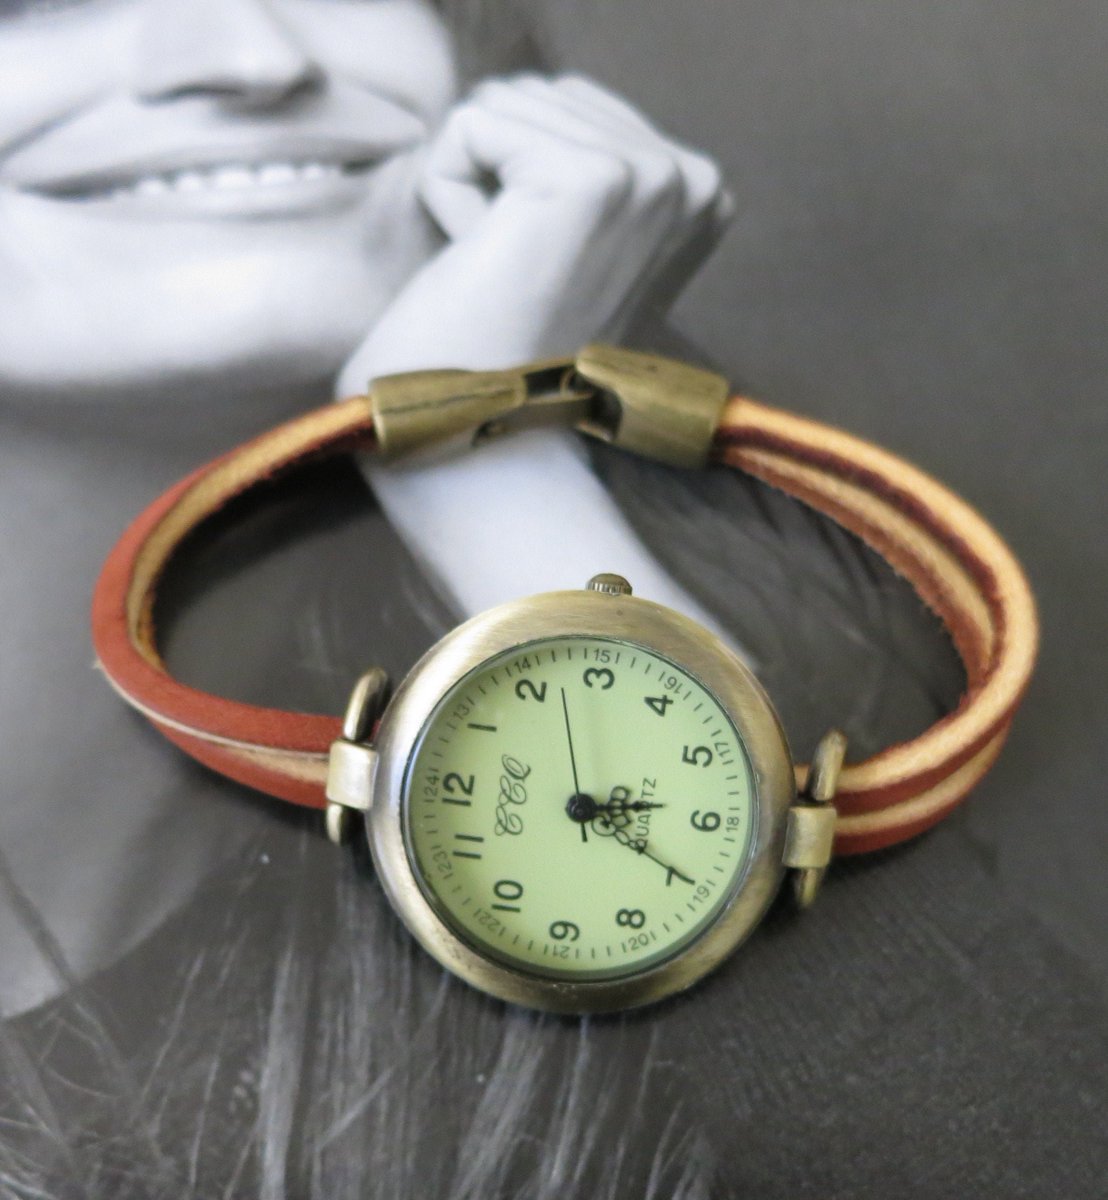 Leather watch, simple watch, casual watch, unusual watch, bronze and leather wristwatch designed by JuSal08  #brown #bronze #unisexadults #no #leather #bohohippie #analog #battery #loggerleather 